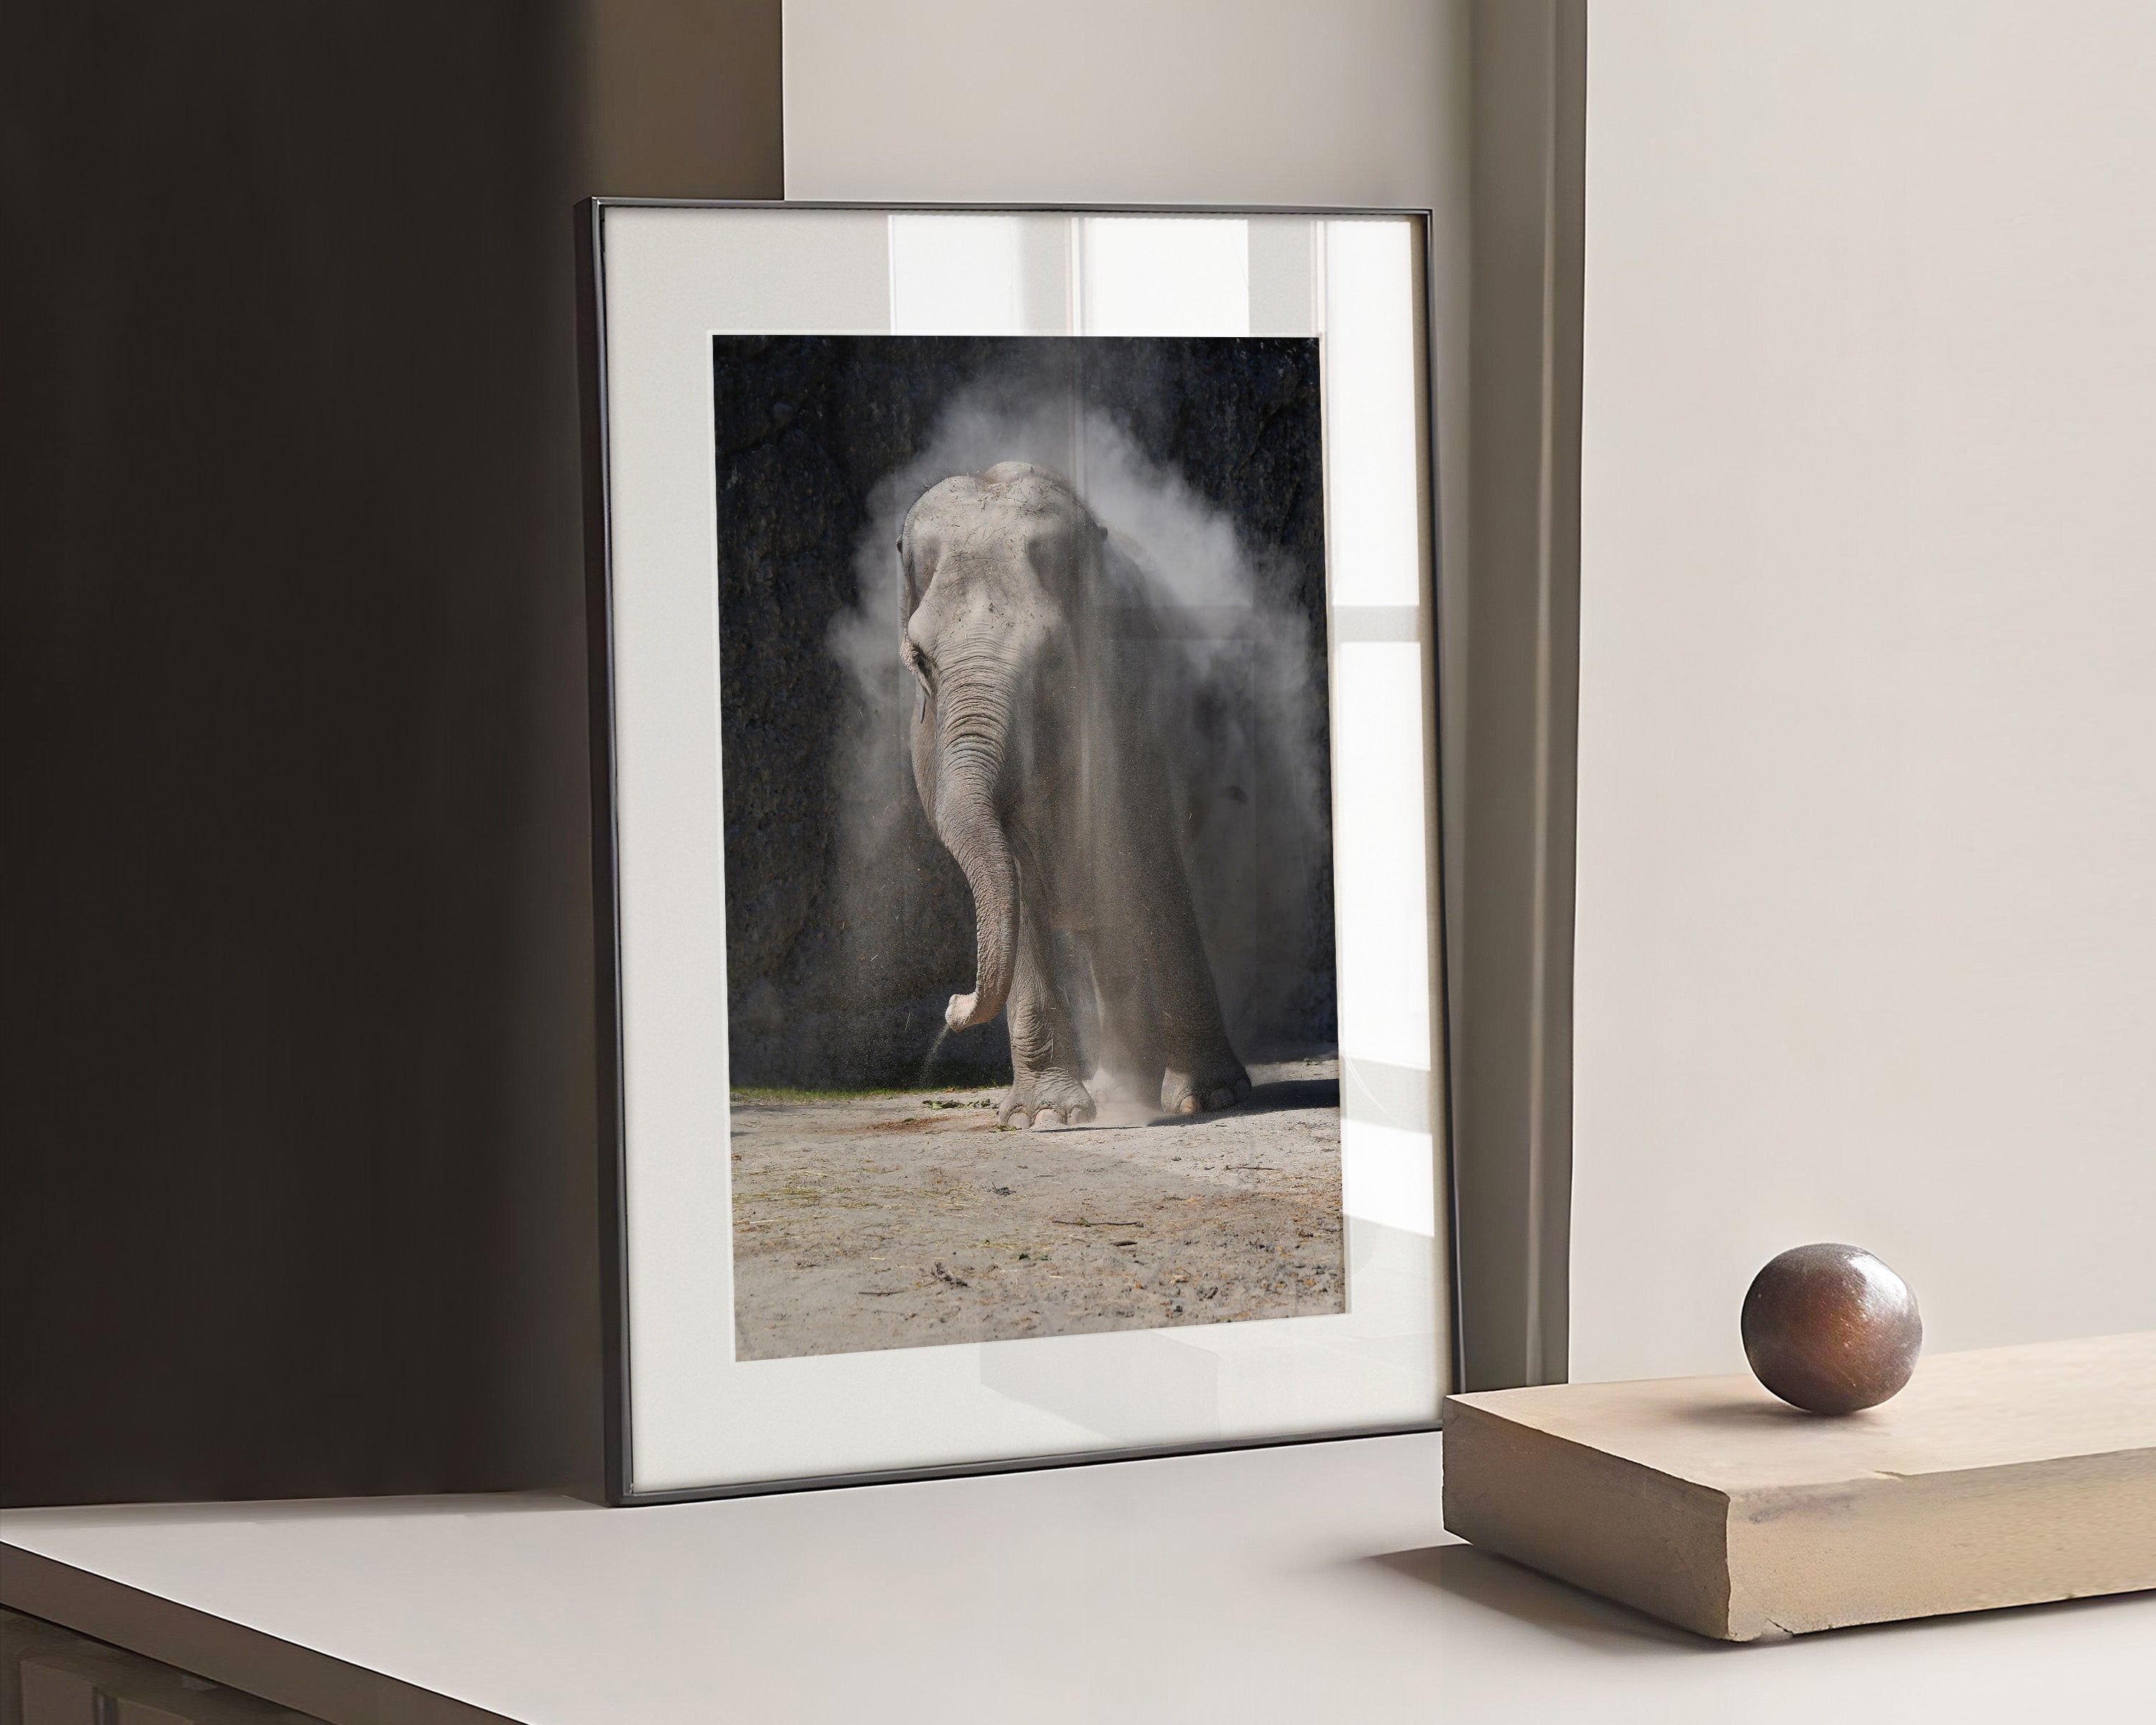 Black and white photography Poster of an elephant walking in the dust.